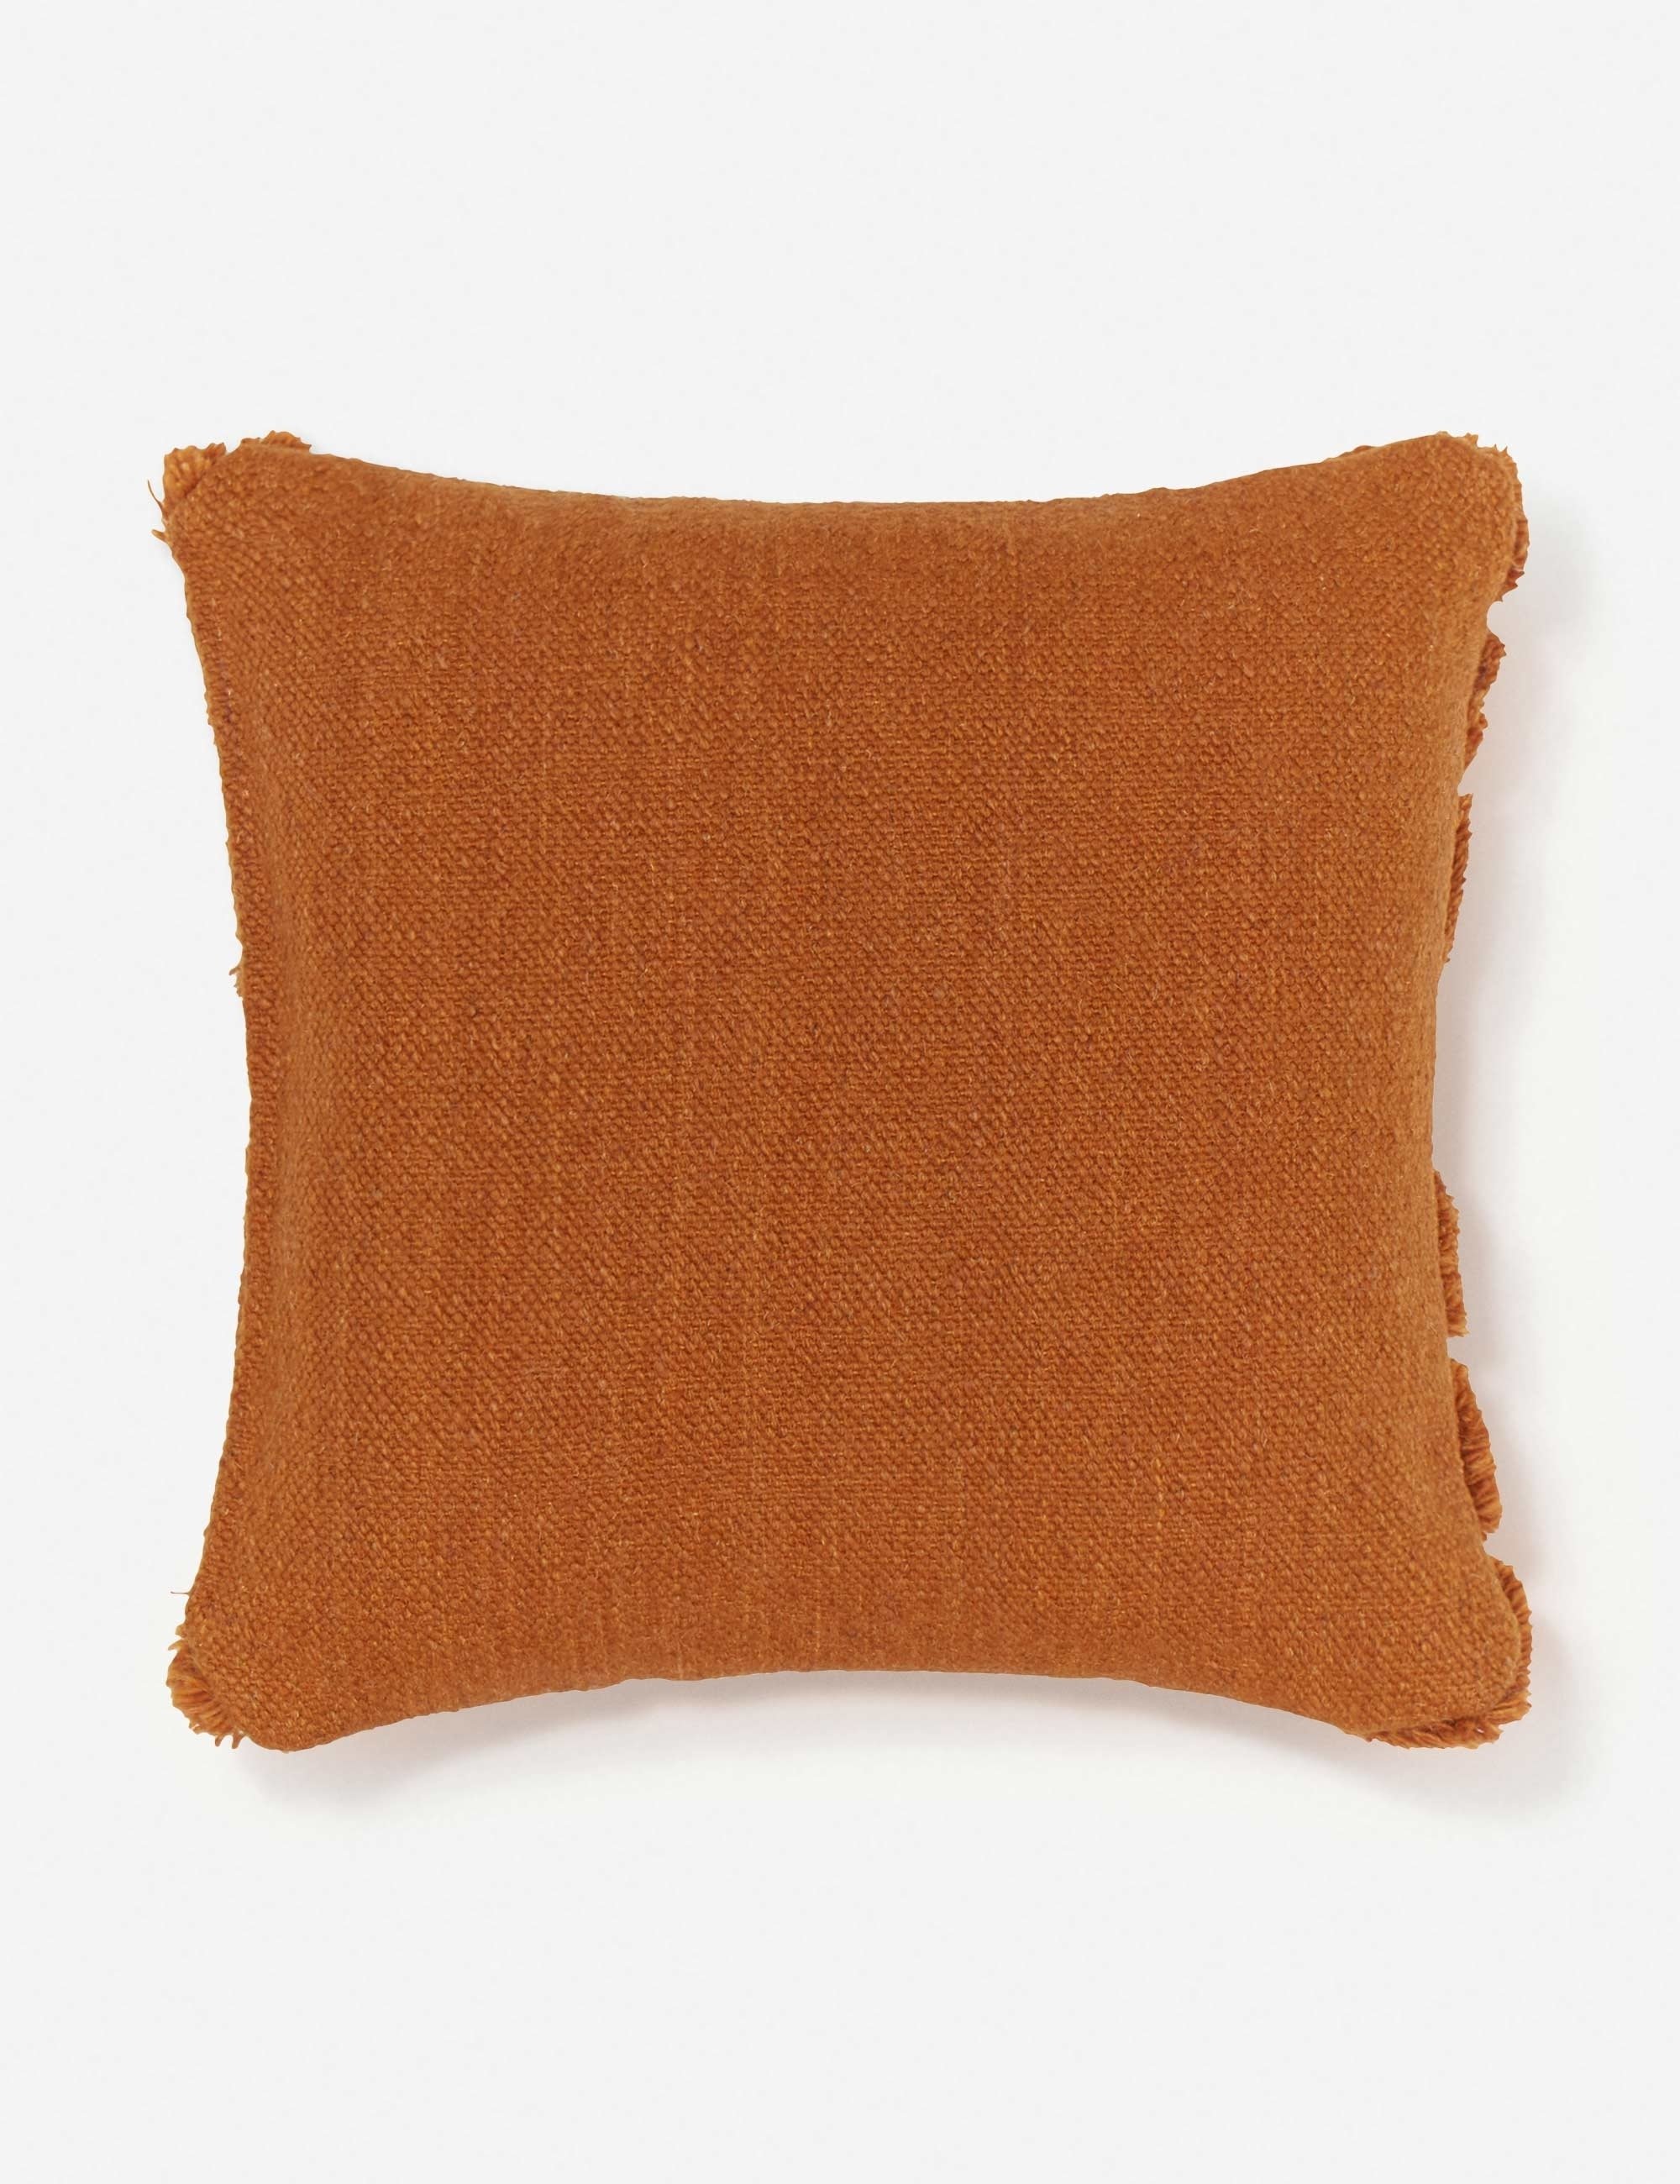 Arches Pillow, Rust By Sarah Sherman Samuel - Image 6